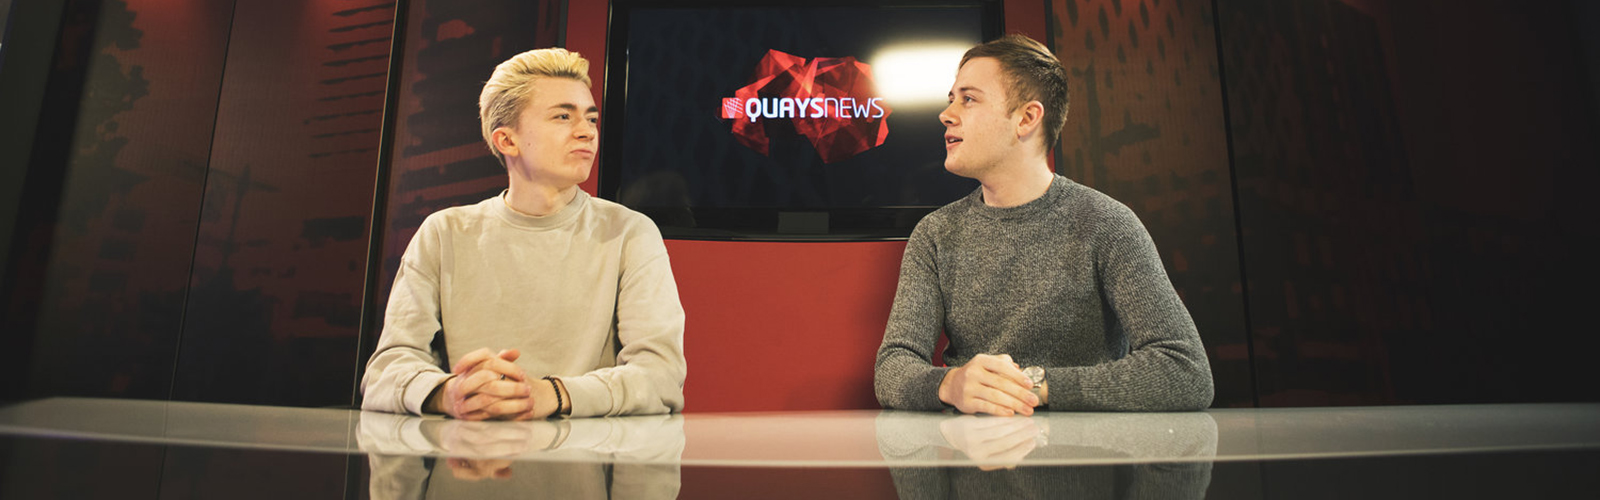 Image: Oliver and Rhys in TV studio